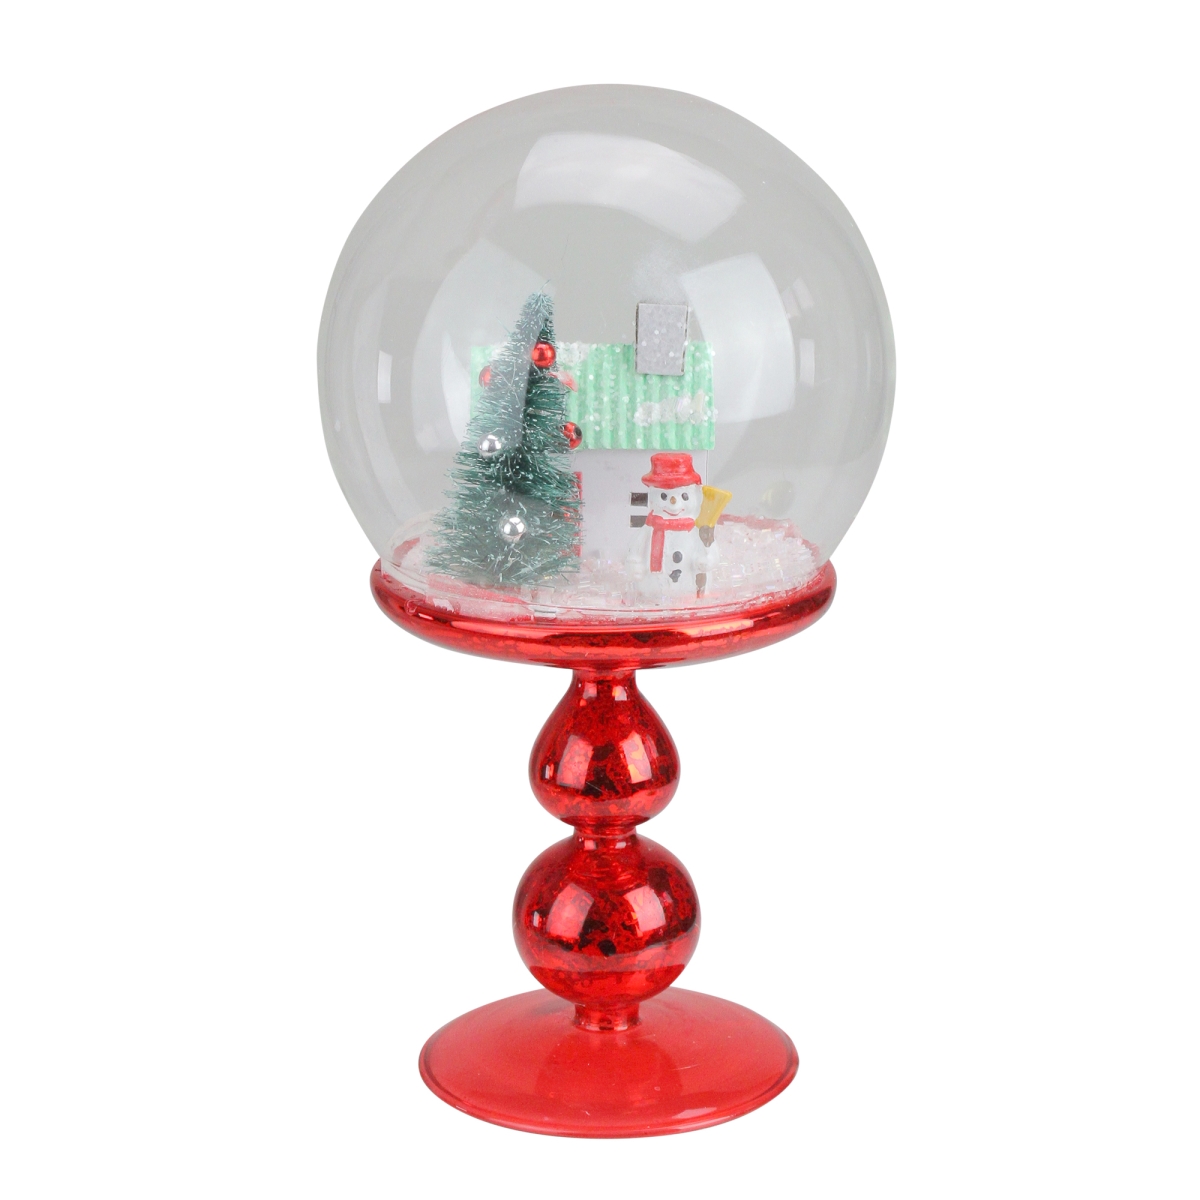 Picture of Avon 33537525 8.75 in. Holiday Scene Pedestal Globe Tabletop Decoration - Red